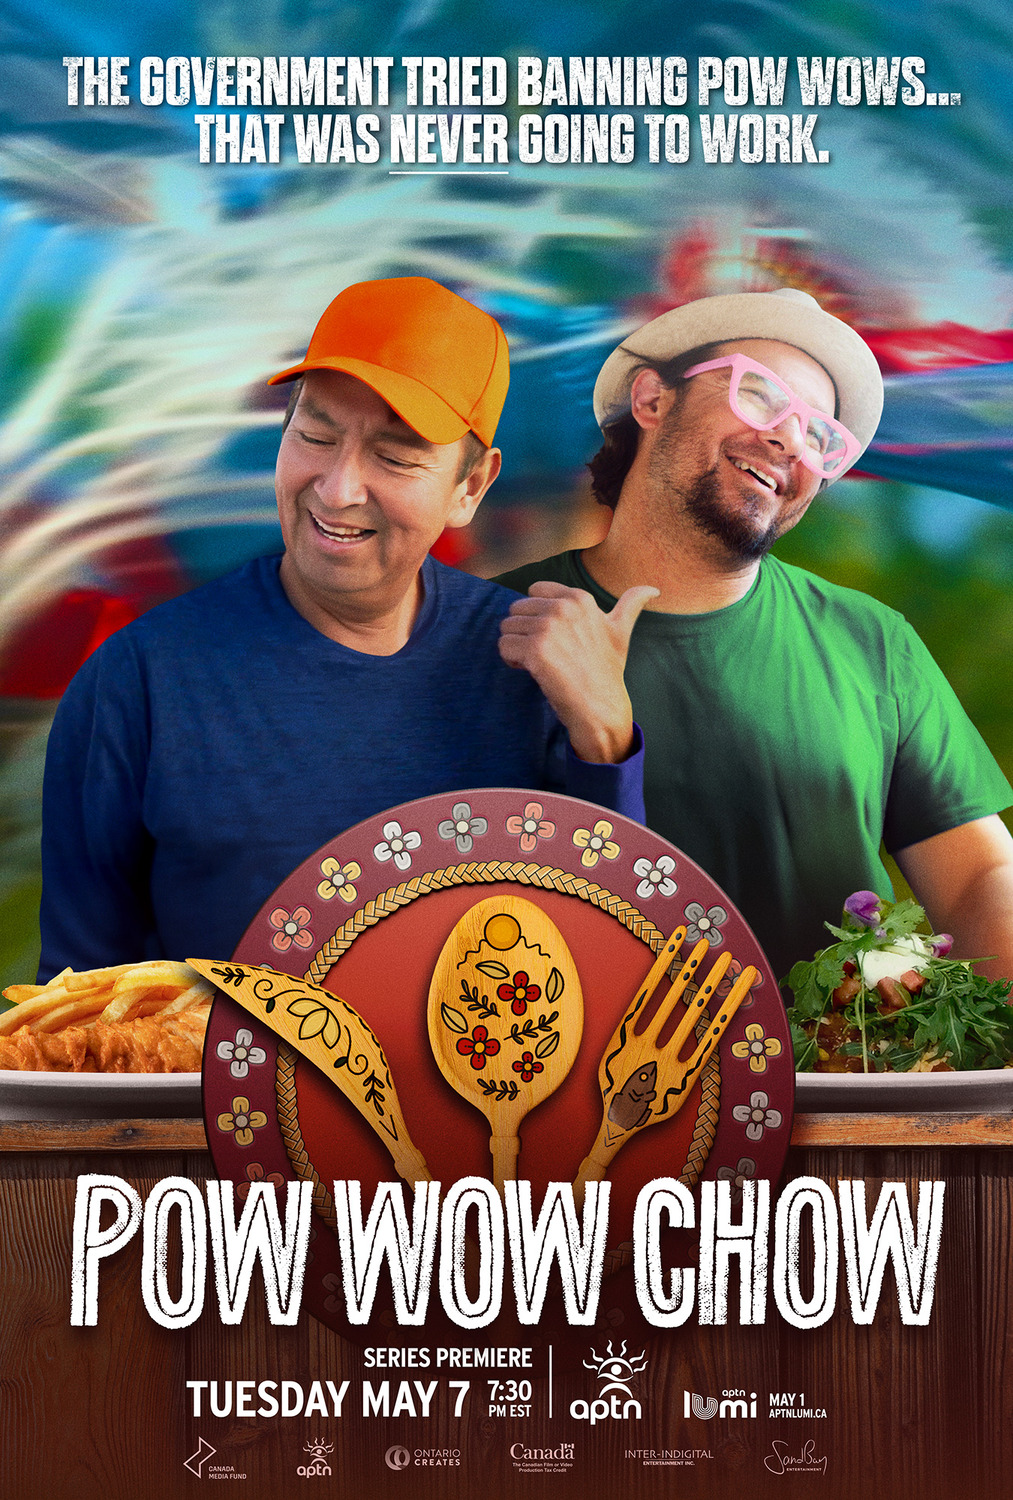 Extra Large TV Poster Image for Pow Wow Chow 